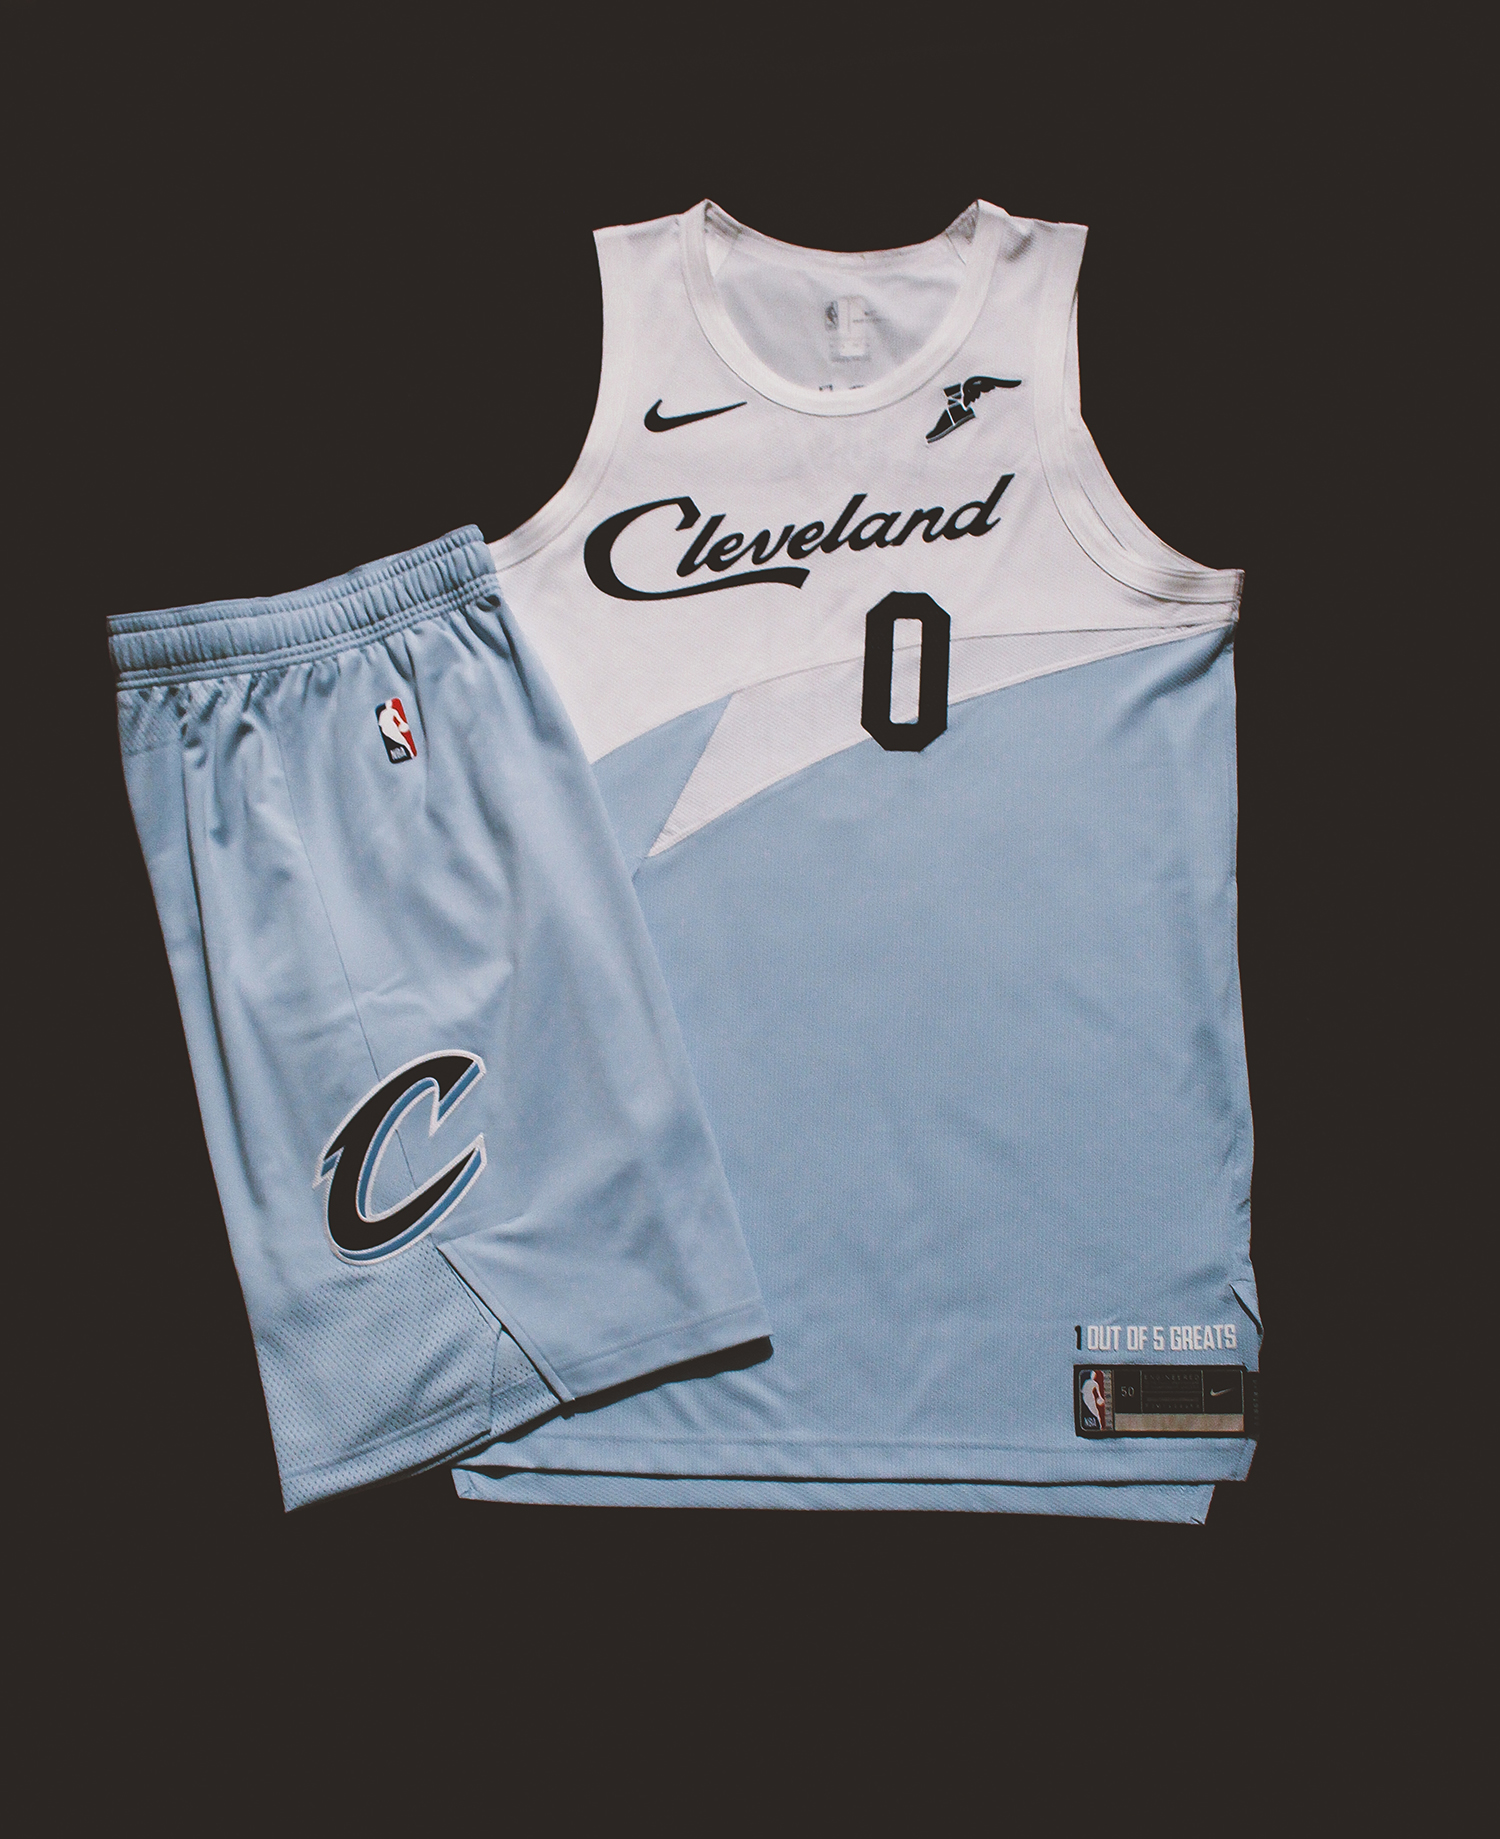 No one is happy about the new Cavs uniforms